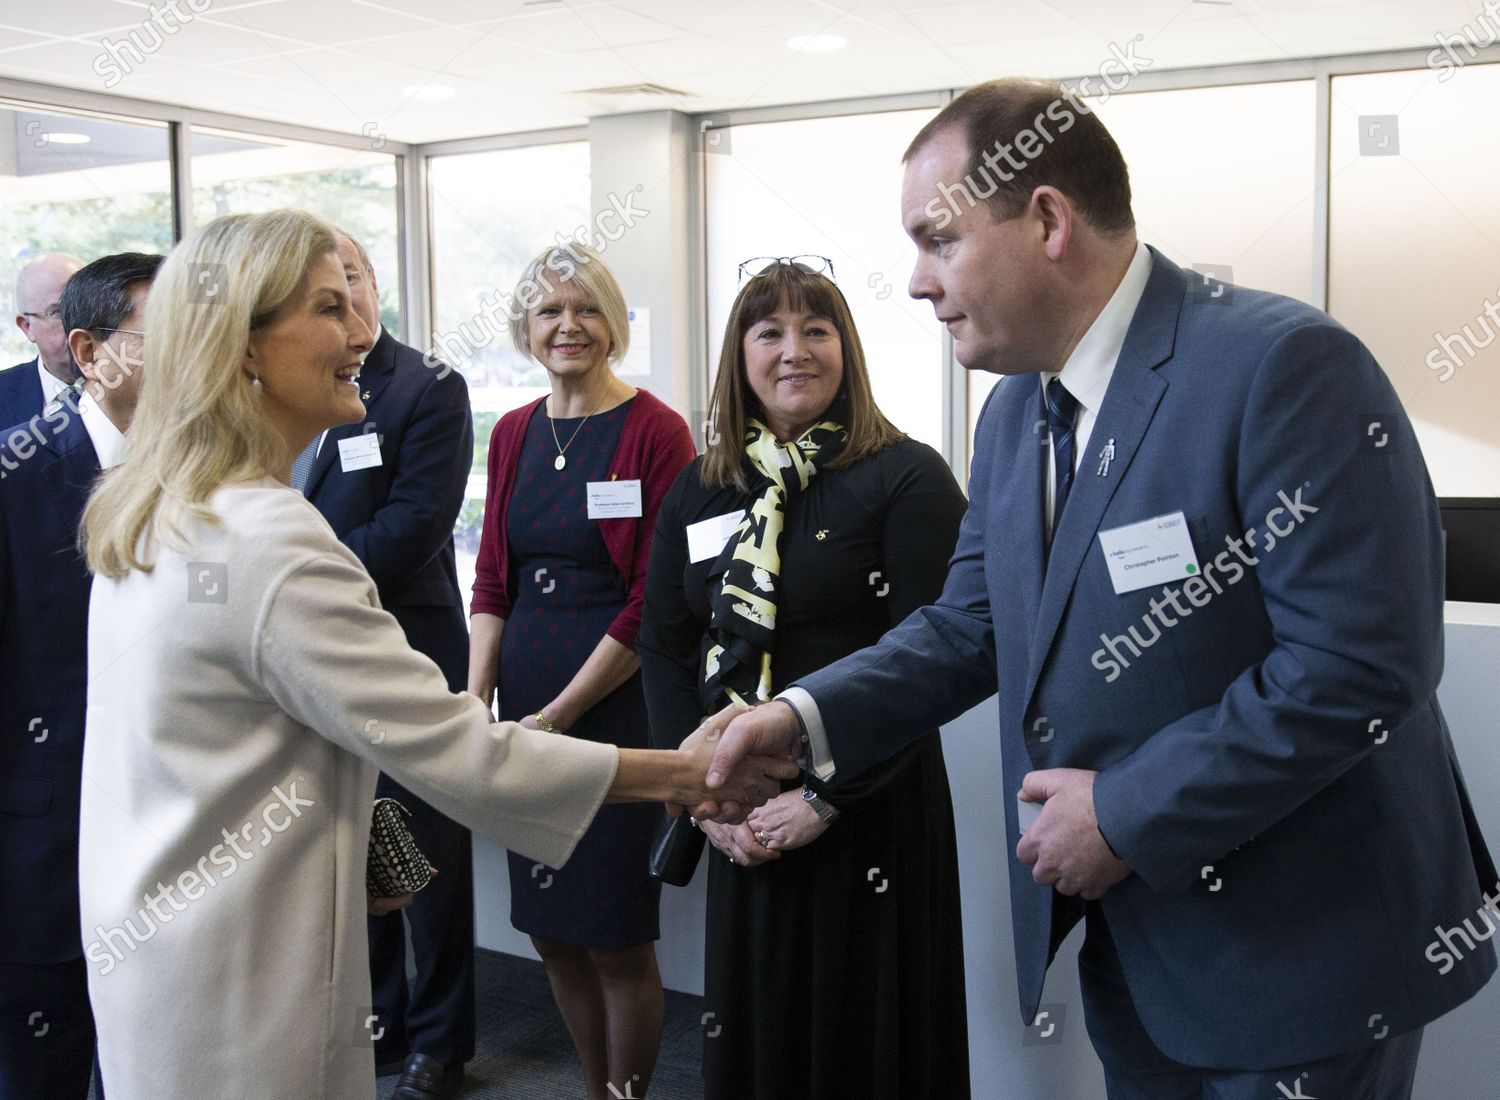 sophie-countess-of-wessex-opens-new-health-sciences-institute-university-of-surrey-guildford-uk-shutterstock-editorial-10542421c.jpg